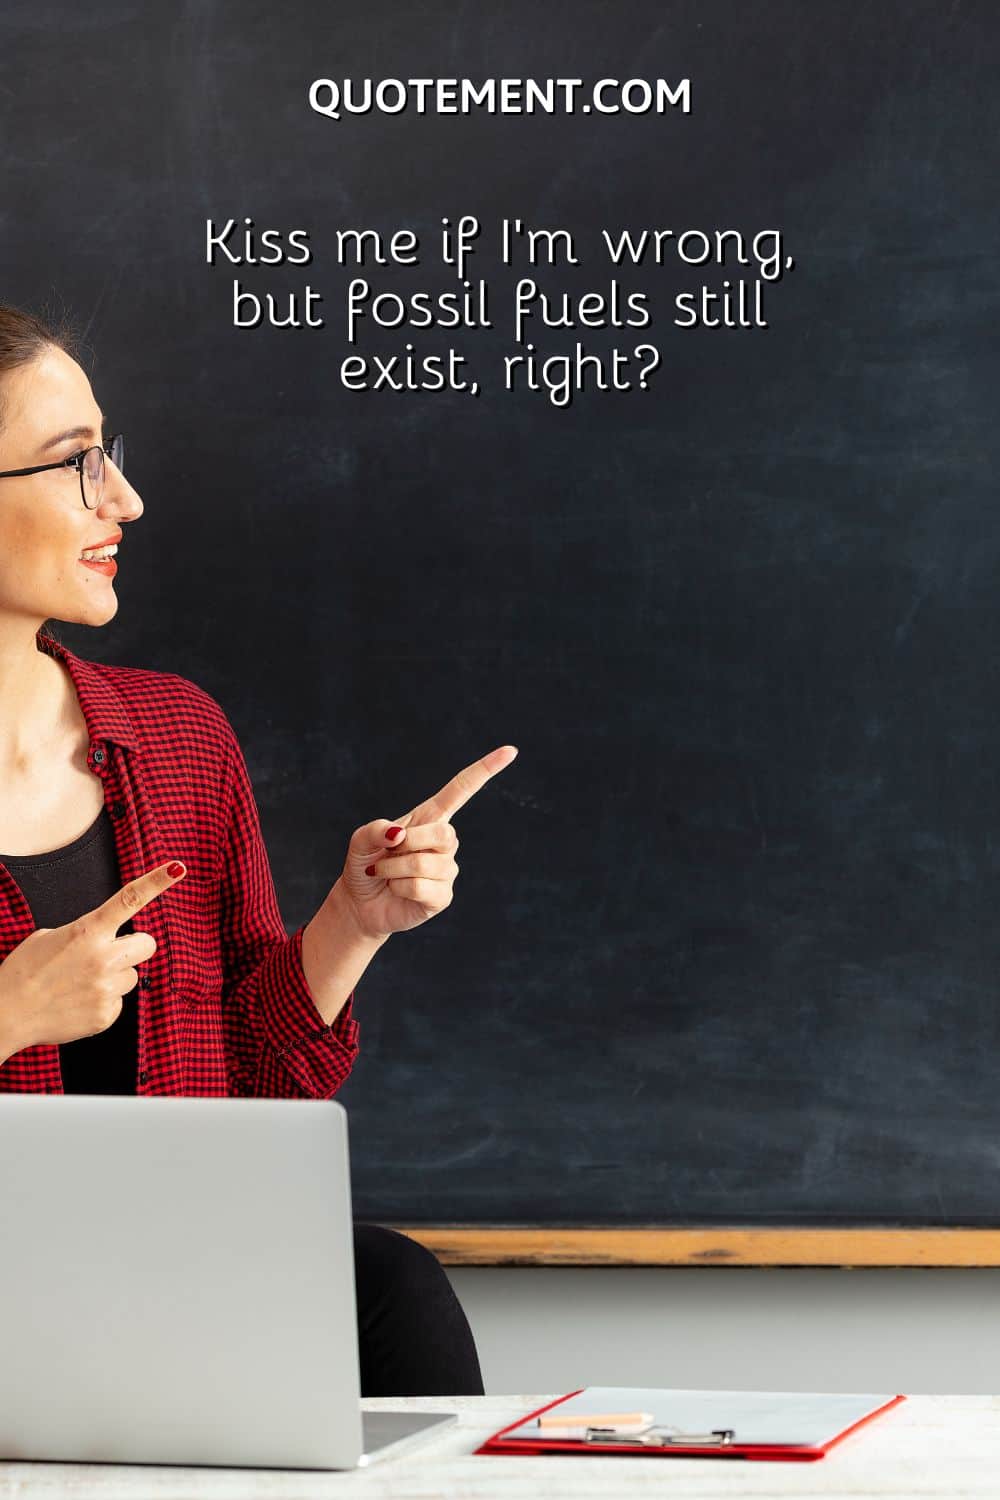 Kiss me if I’m wrong, but fossil fuels still exist, right